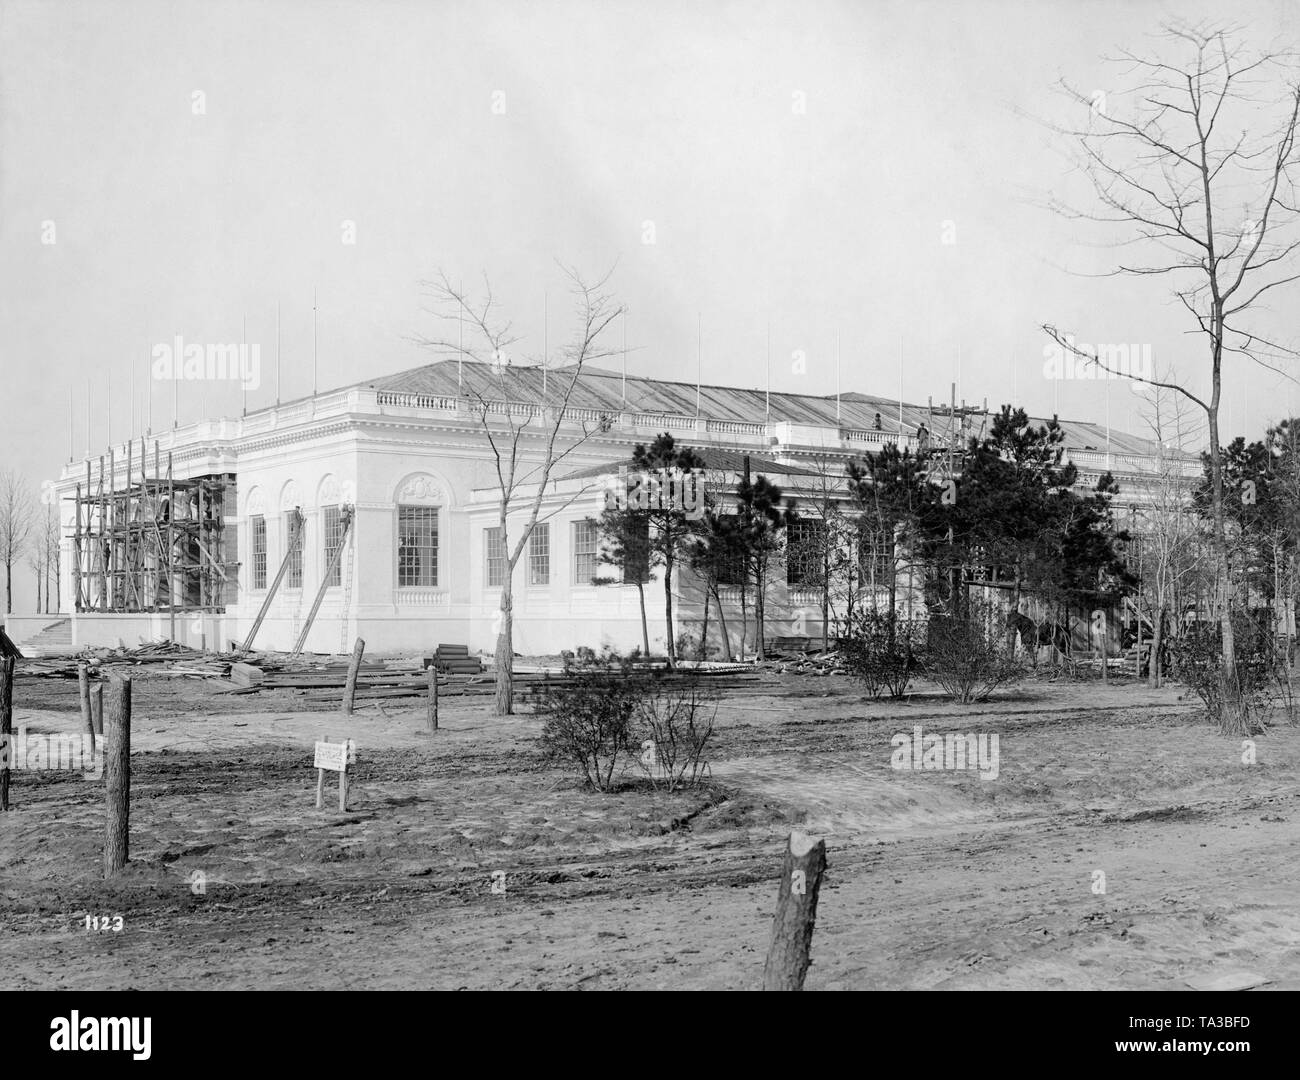 View of an administrative building in Norfolk, Virginia. The building will be renovated for the 'Jamestown Exposition'. Stock Photo